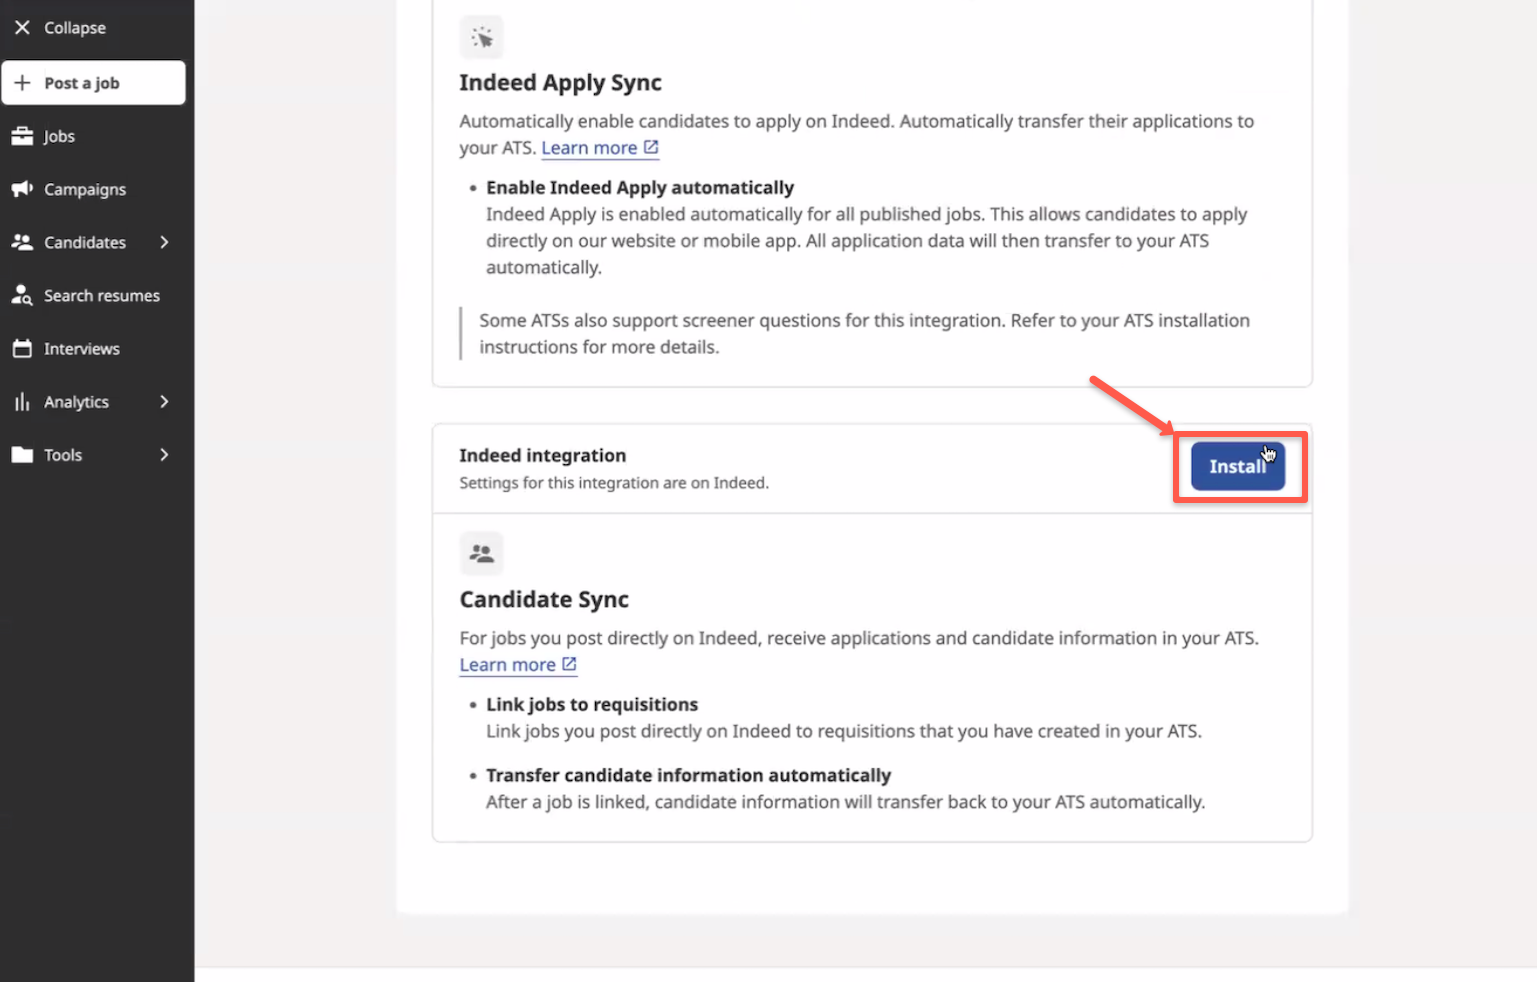 Install button outlined on Candidate Sync tile on integration detail page in Indeed